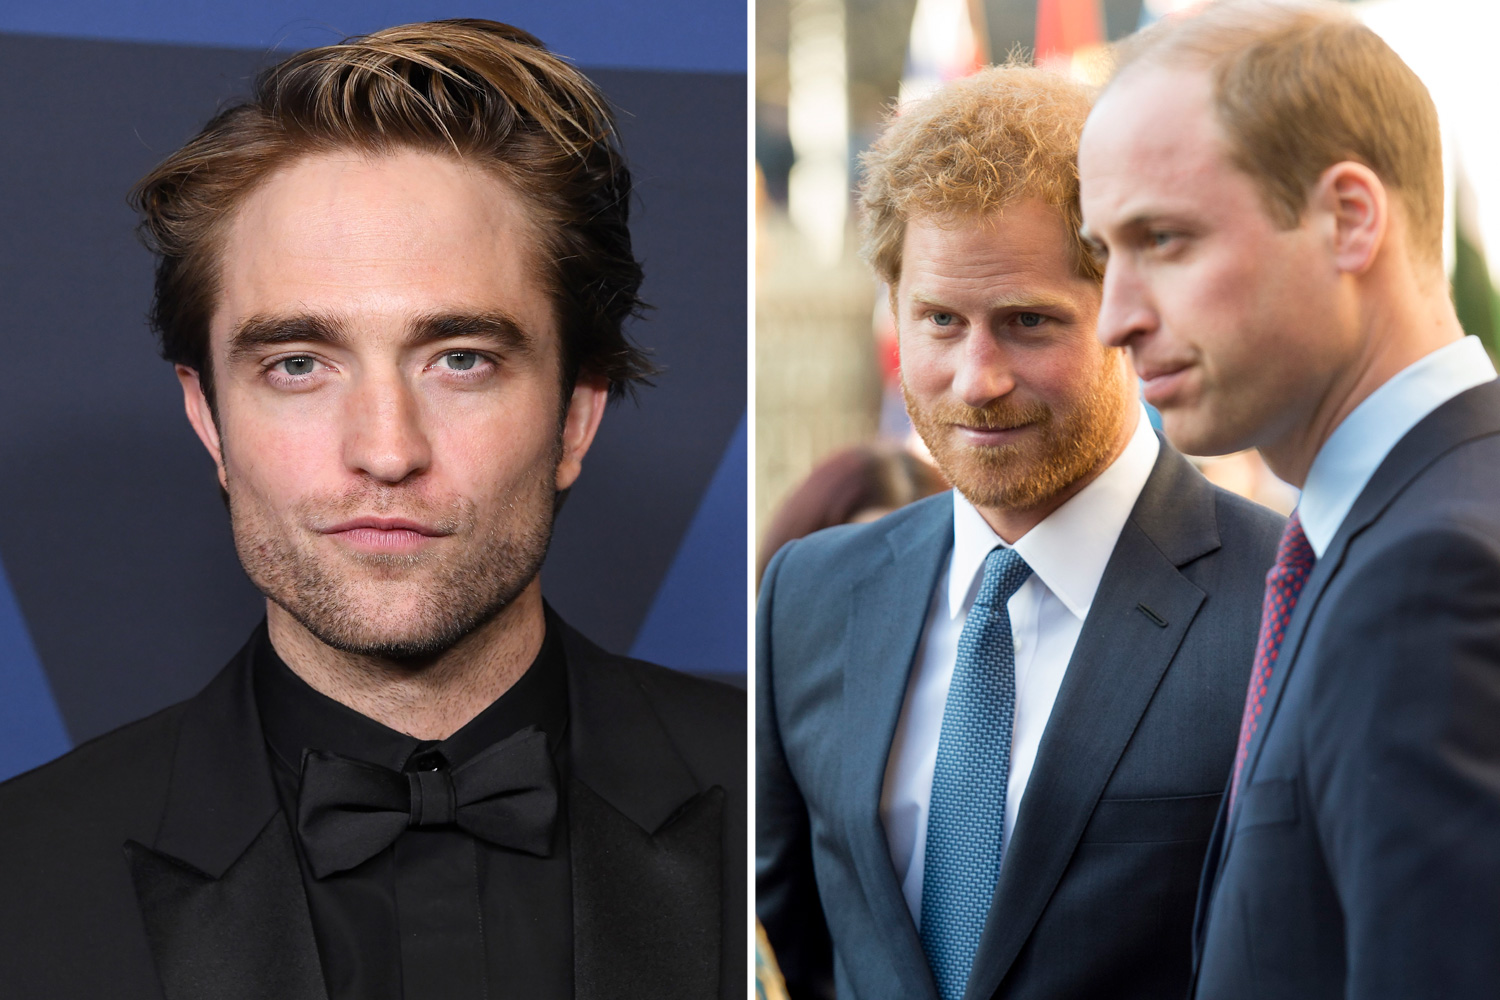 I've been at RADA with Prince William": Robert Pattinson Lied About Being A Royal To Get Hollywood Recognition When He First Came to LA - Animated Times